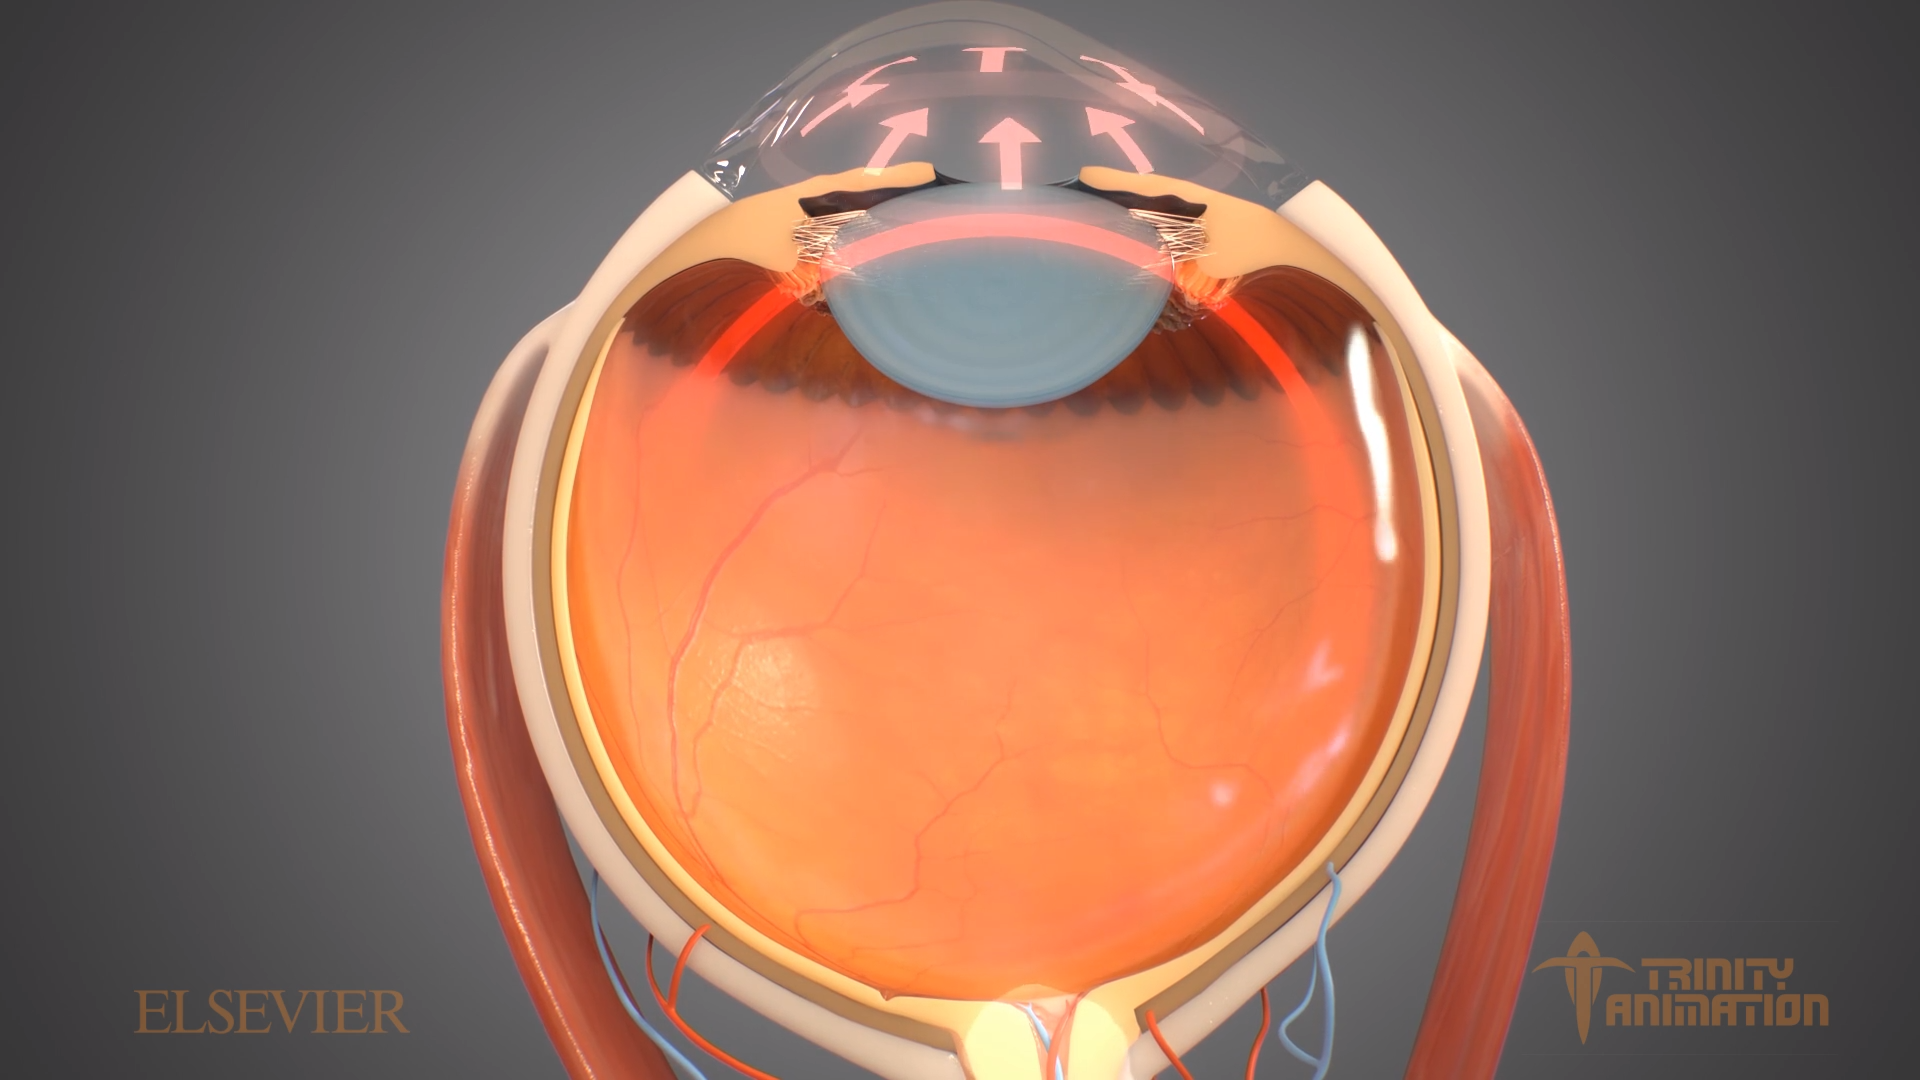 In Trinity's surgical animations, manipulated imagery of the eye sliced in half display interior elements of the eye and demonstrate how the eye's drainage canals become clogged over time, causing an increase in internal eye pressure and subsequent potential damage to the optic nerve.